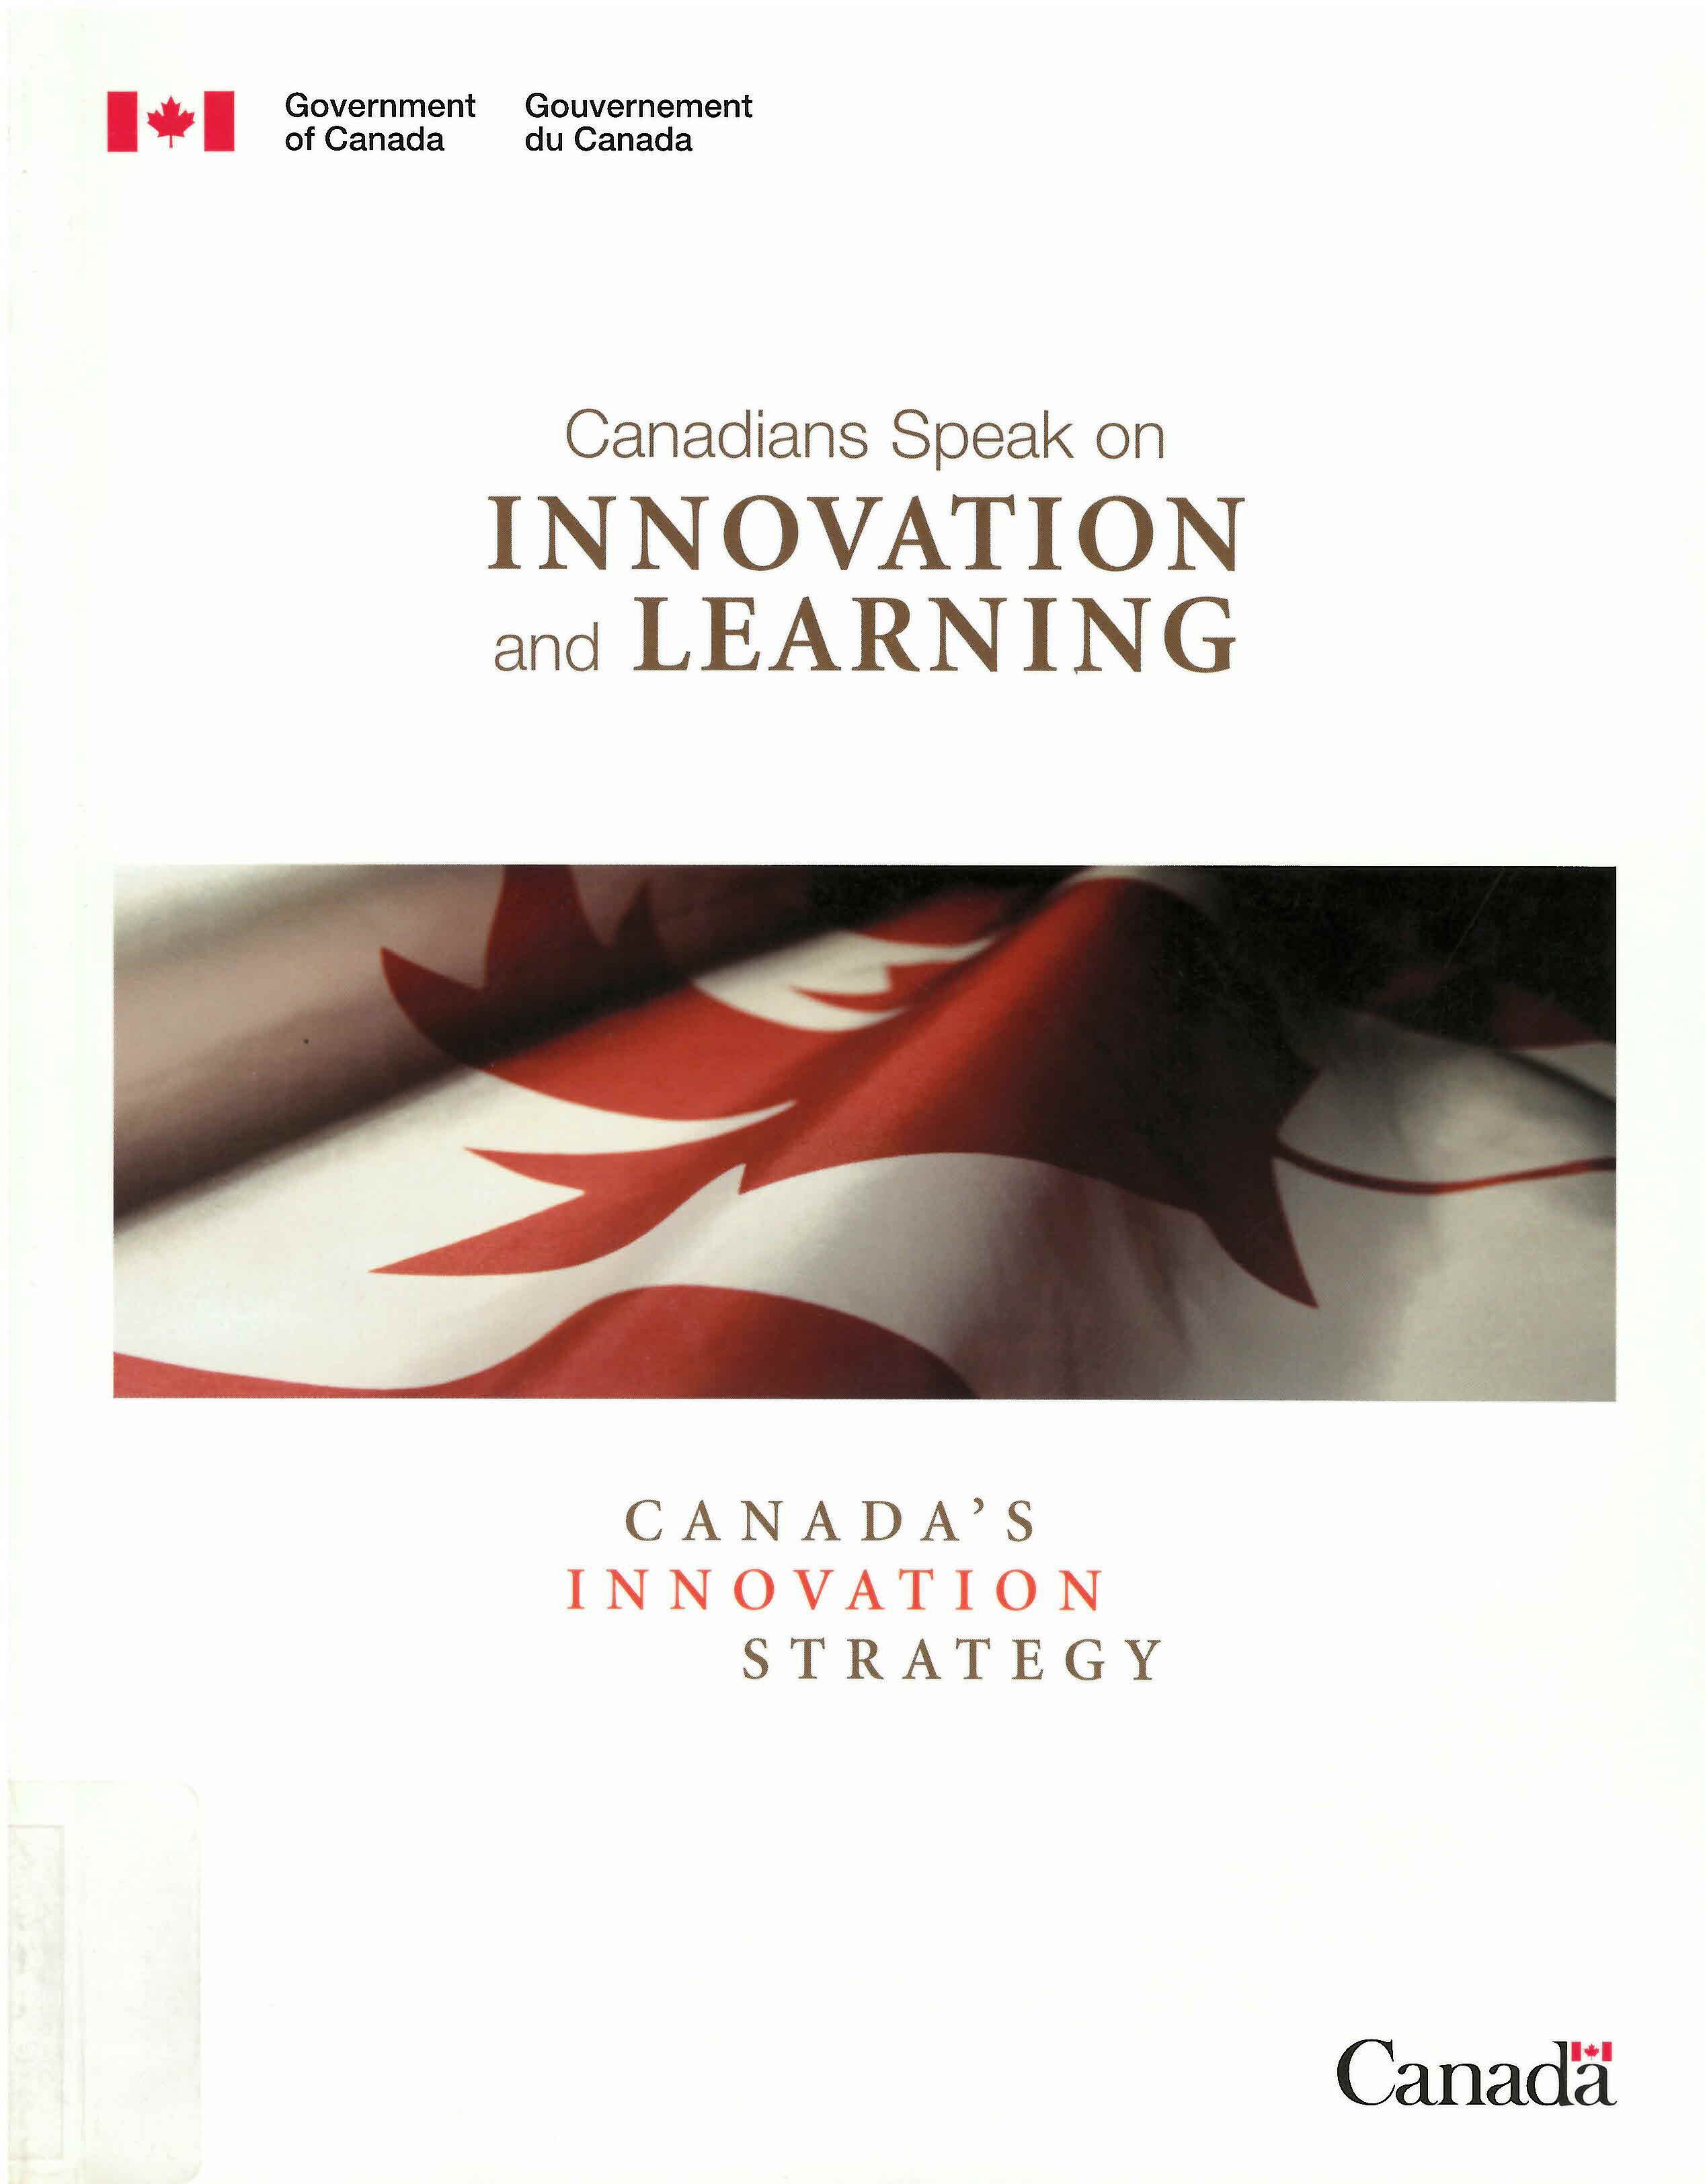 Canadians speak on innovation and learning .